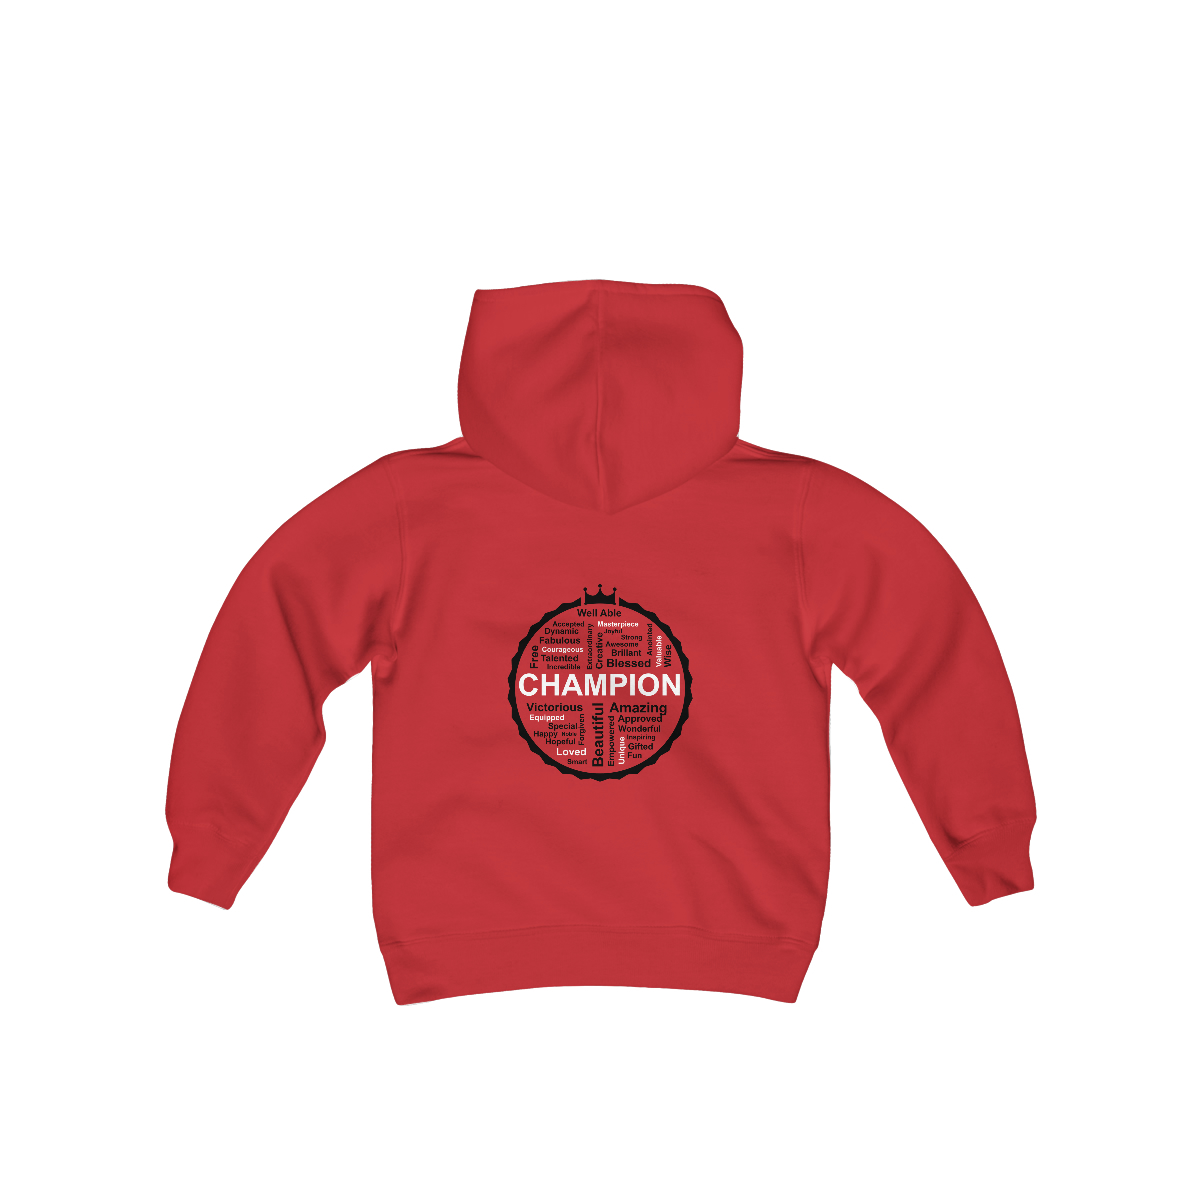 Hoodie Champions Kids - Club Needs CHAMPION Special Ministry